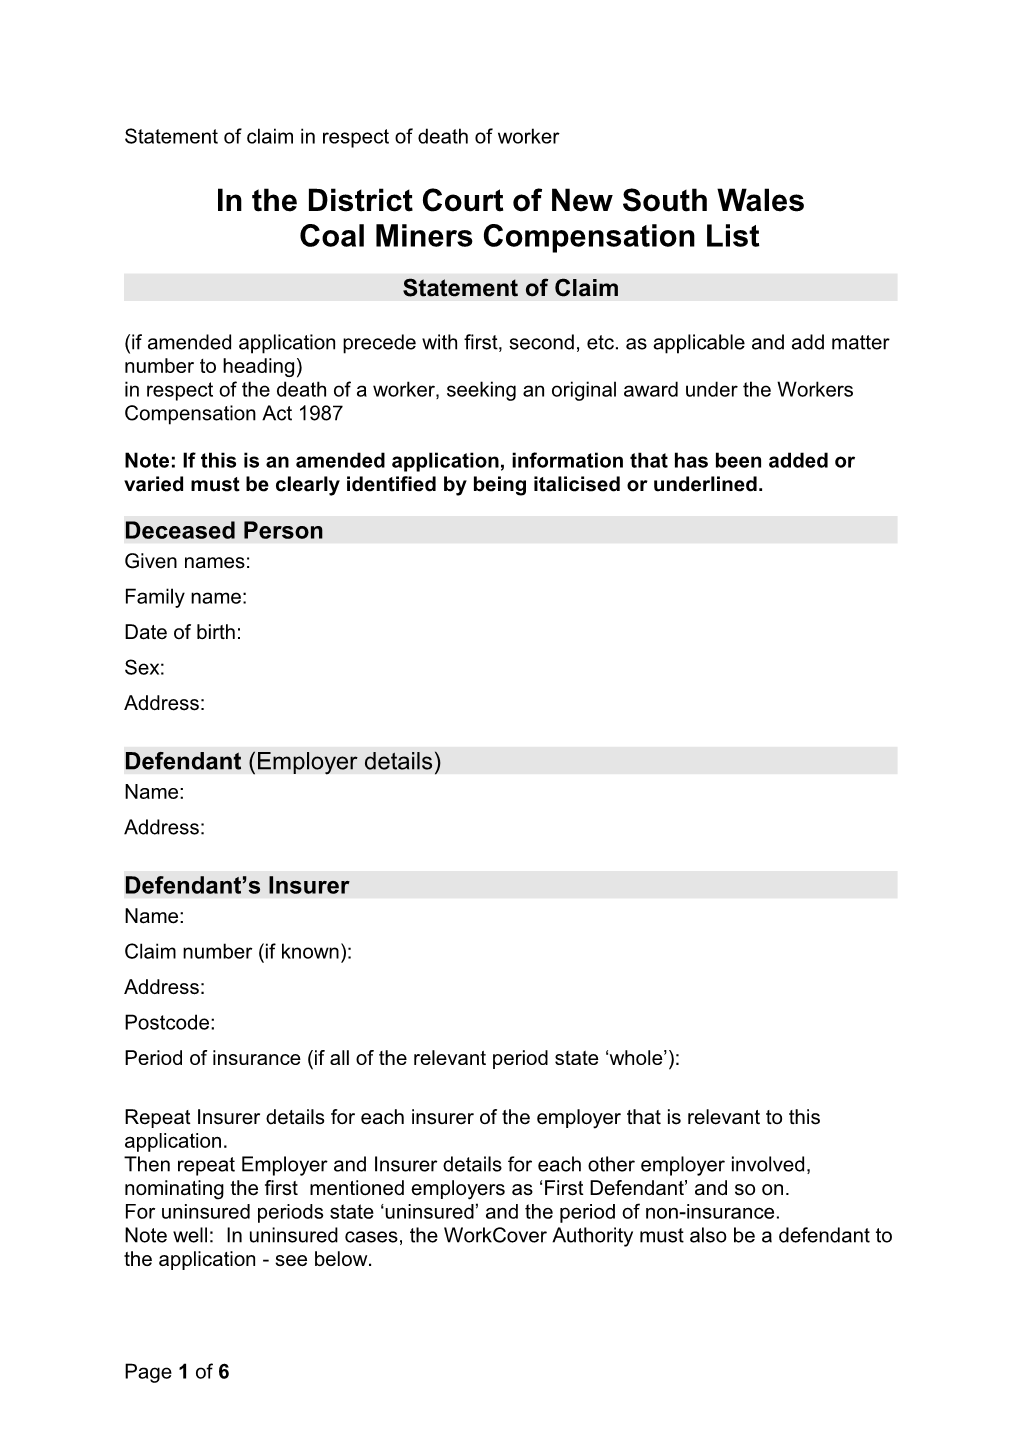 Coal Miners Workers Compensation Statement of Claim - Deceased